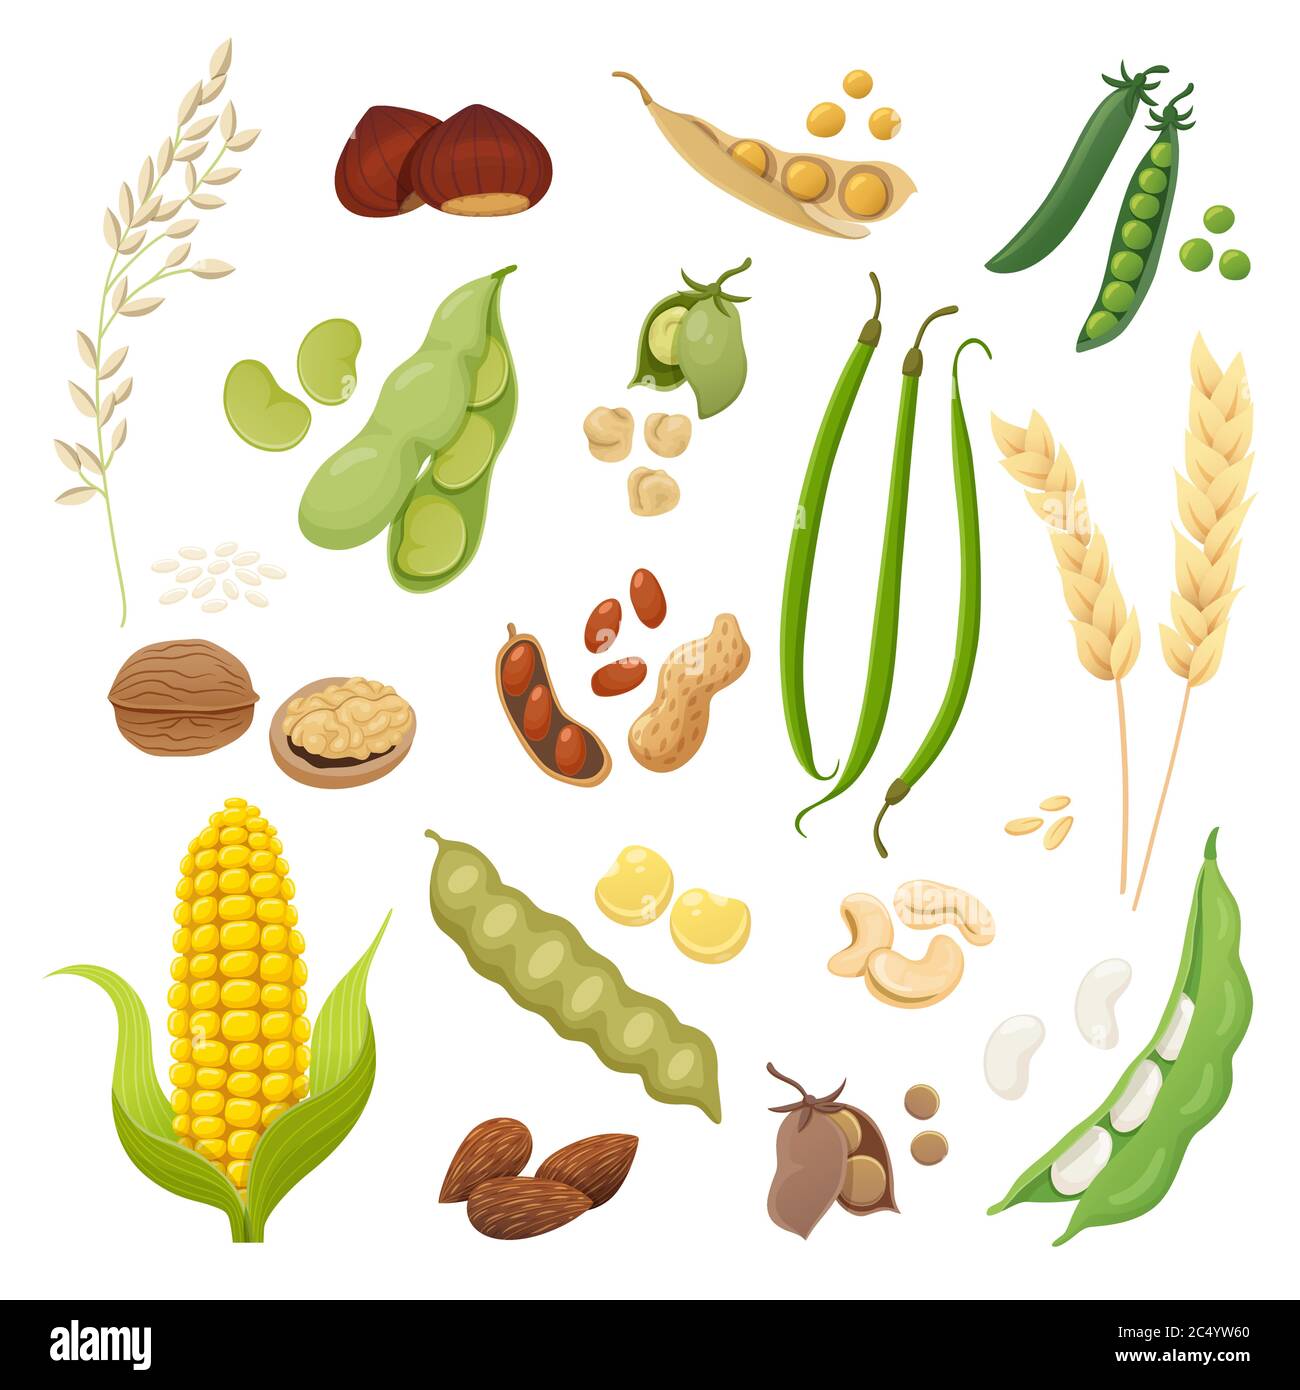 Cute and tasty legumes, grains and nuts collection.  Healthy food ingredients. Vector illustration. Stock Vector